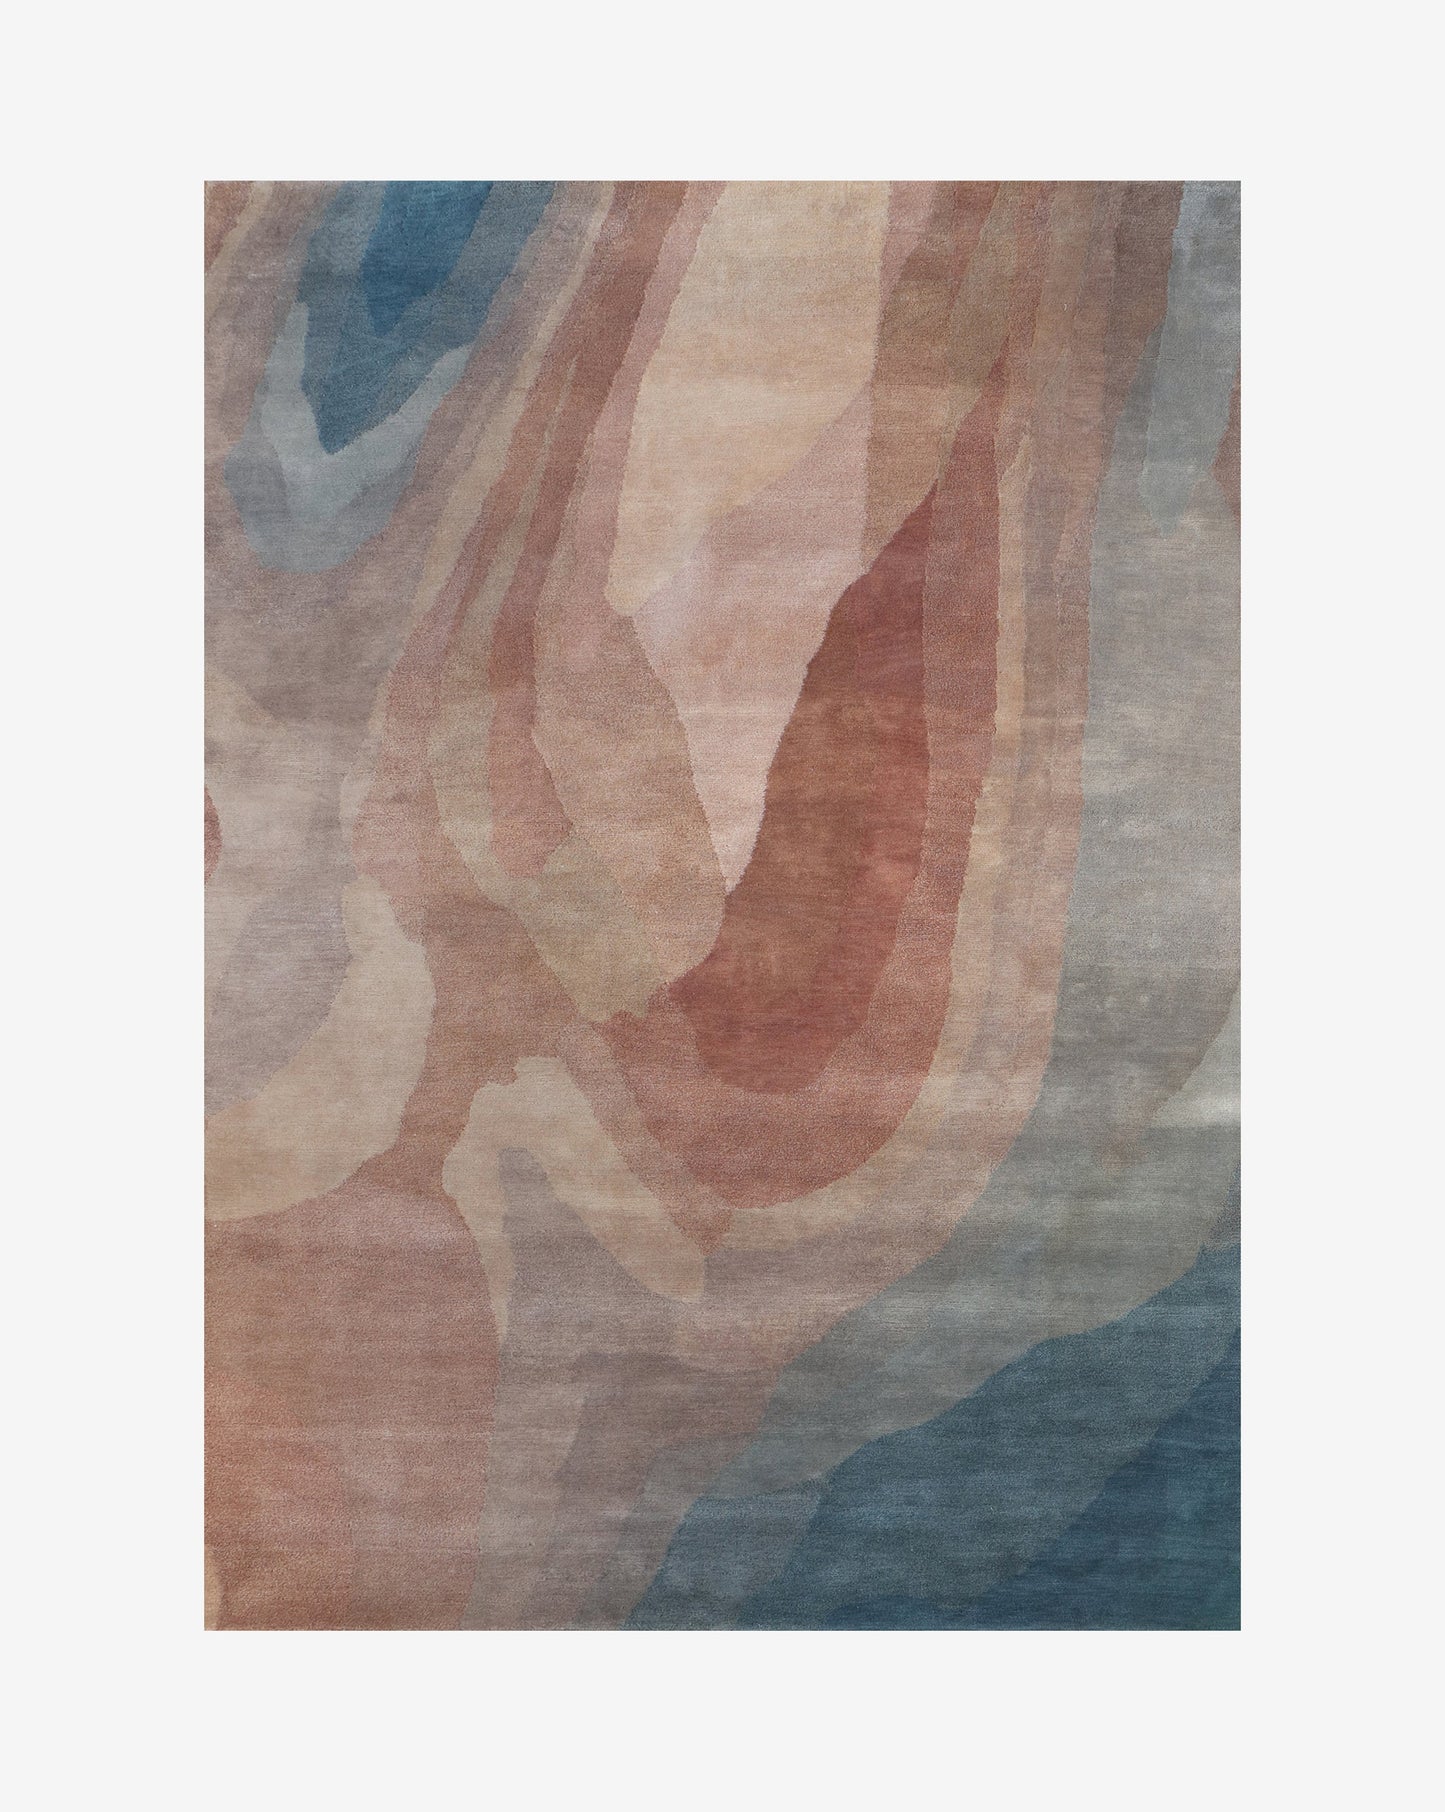 A Progressions Hand Knotted Rug 5' x 8' Isthmus made of merino wool with an elegant abstract design in blue, pink, and brown